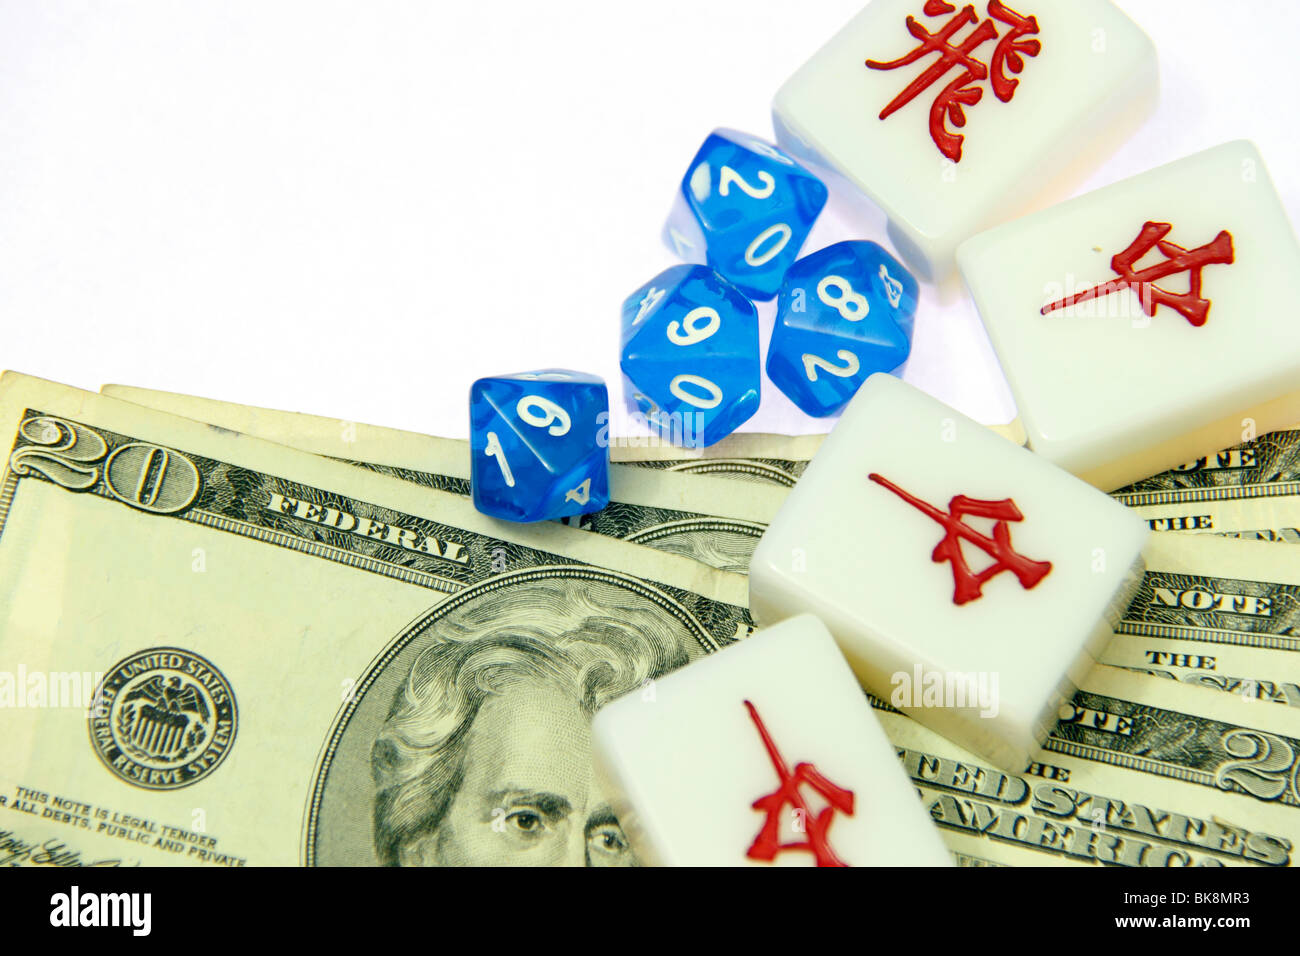 A game of Mah-jong with US currency Stock Photo